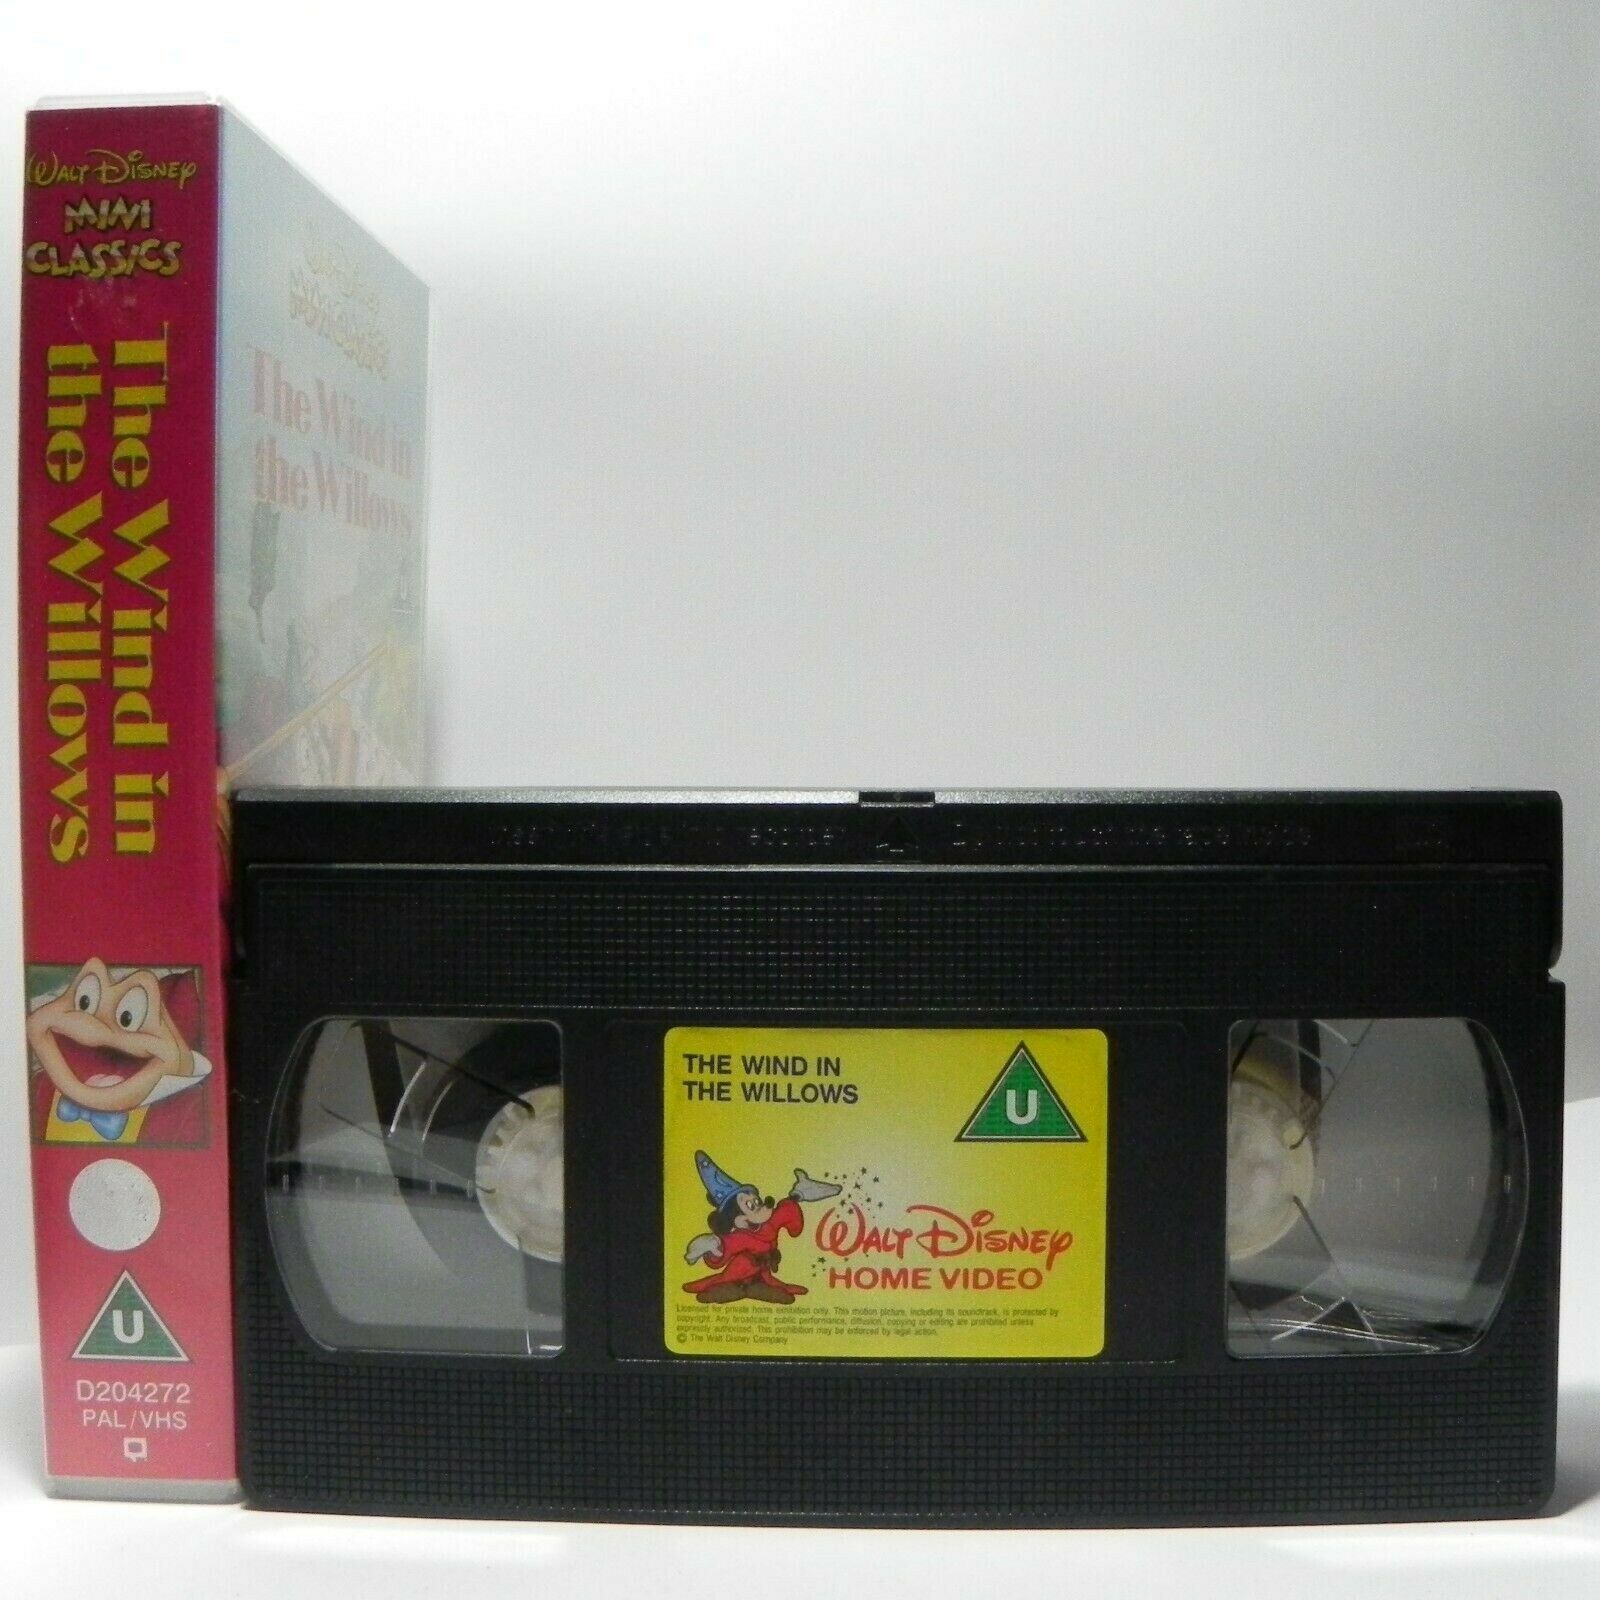 The Wind In The Willows - Walt Disney Classic - Animated - Magical Stories - VHS-